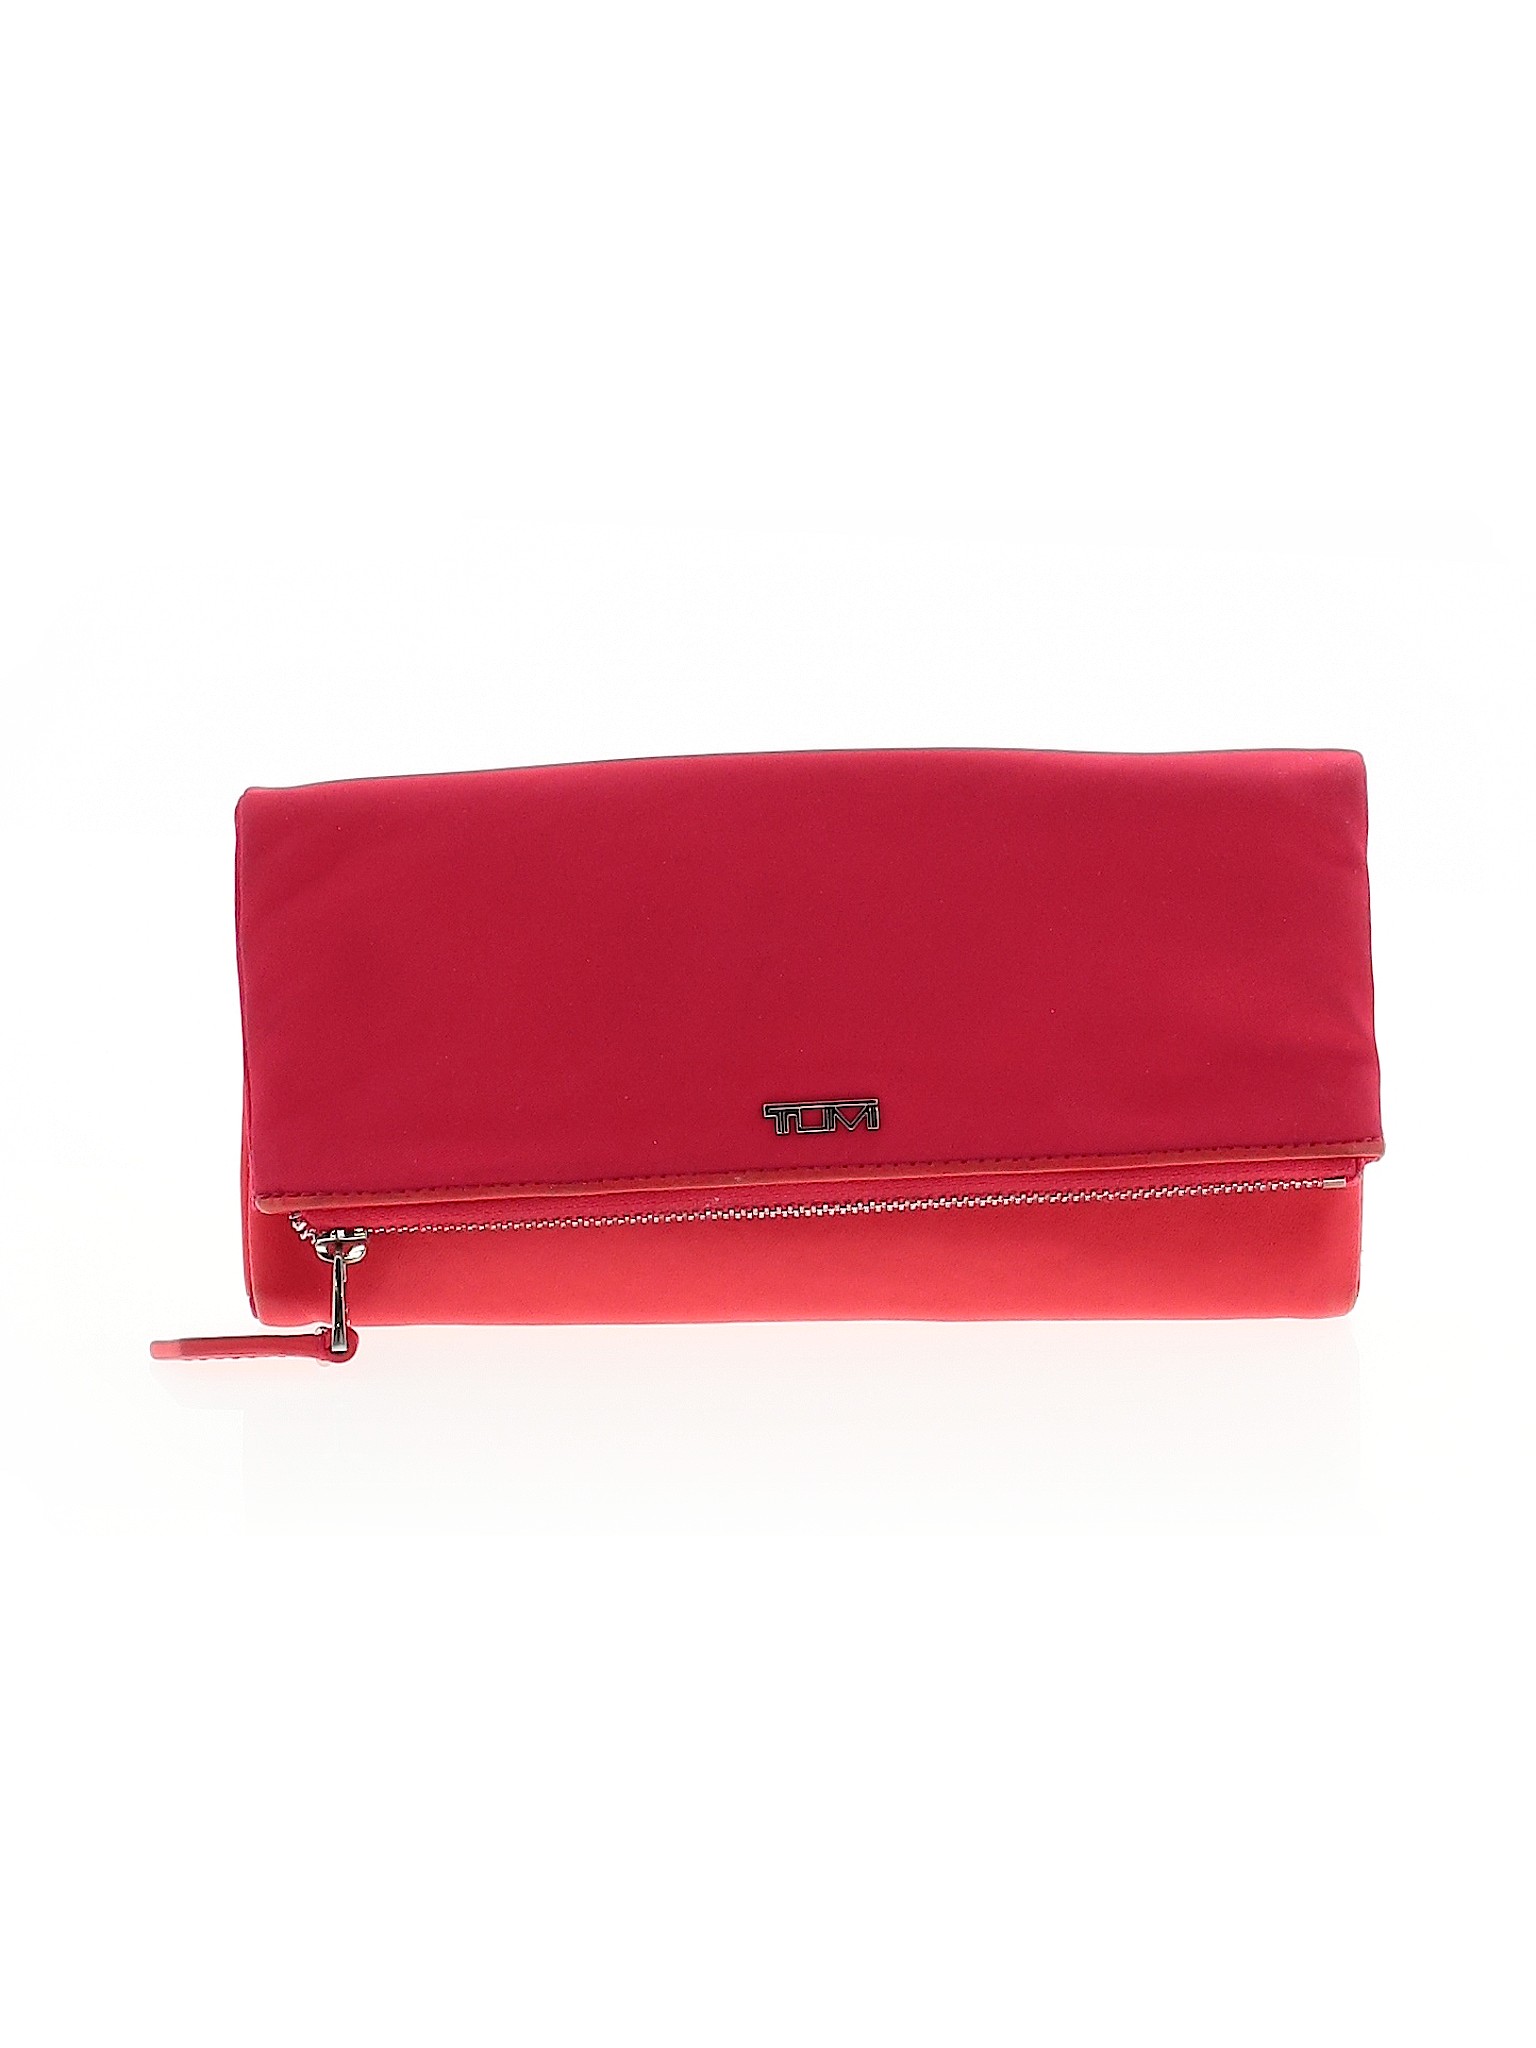 Details about Tumi Women Red Wallet One Size